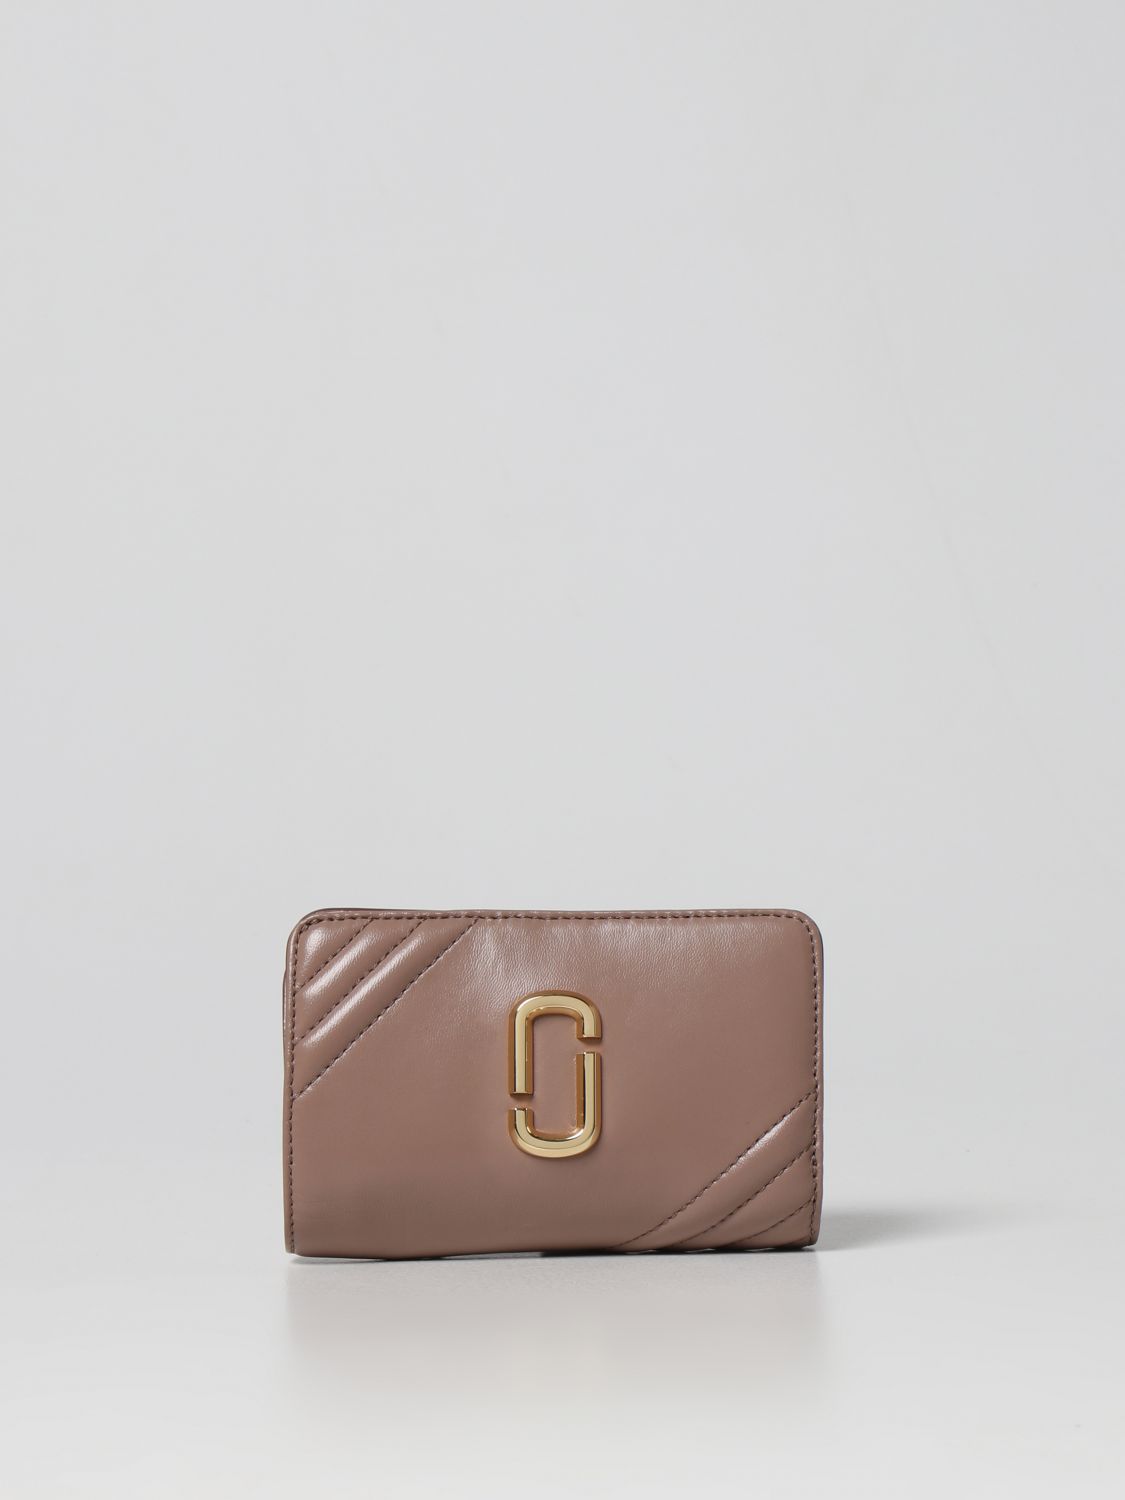 MARC JACOBS: The Glam Shot leather wallet - Beige | Marc Jacobs wallet ...